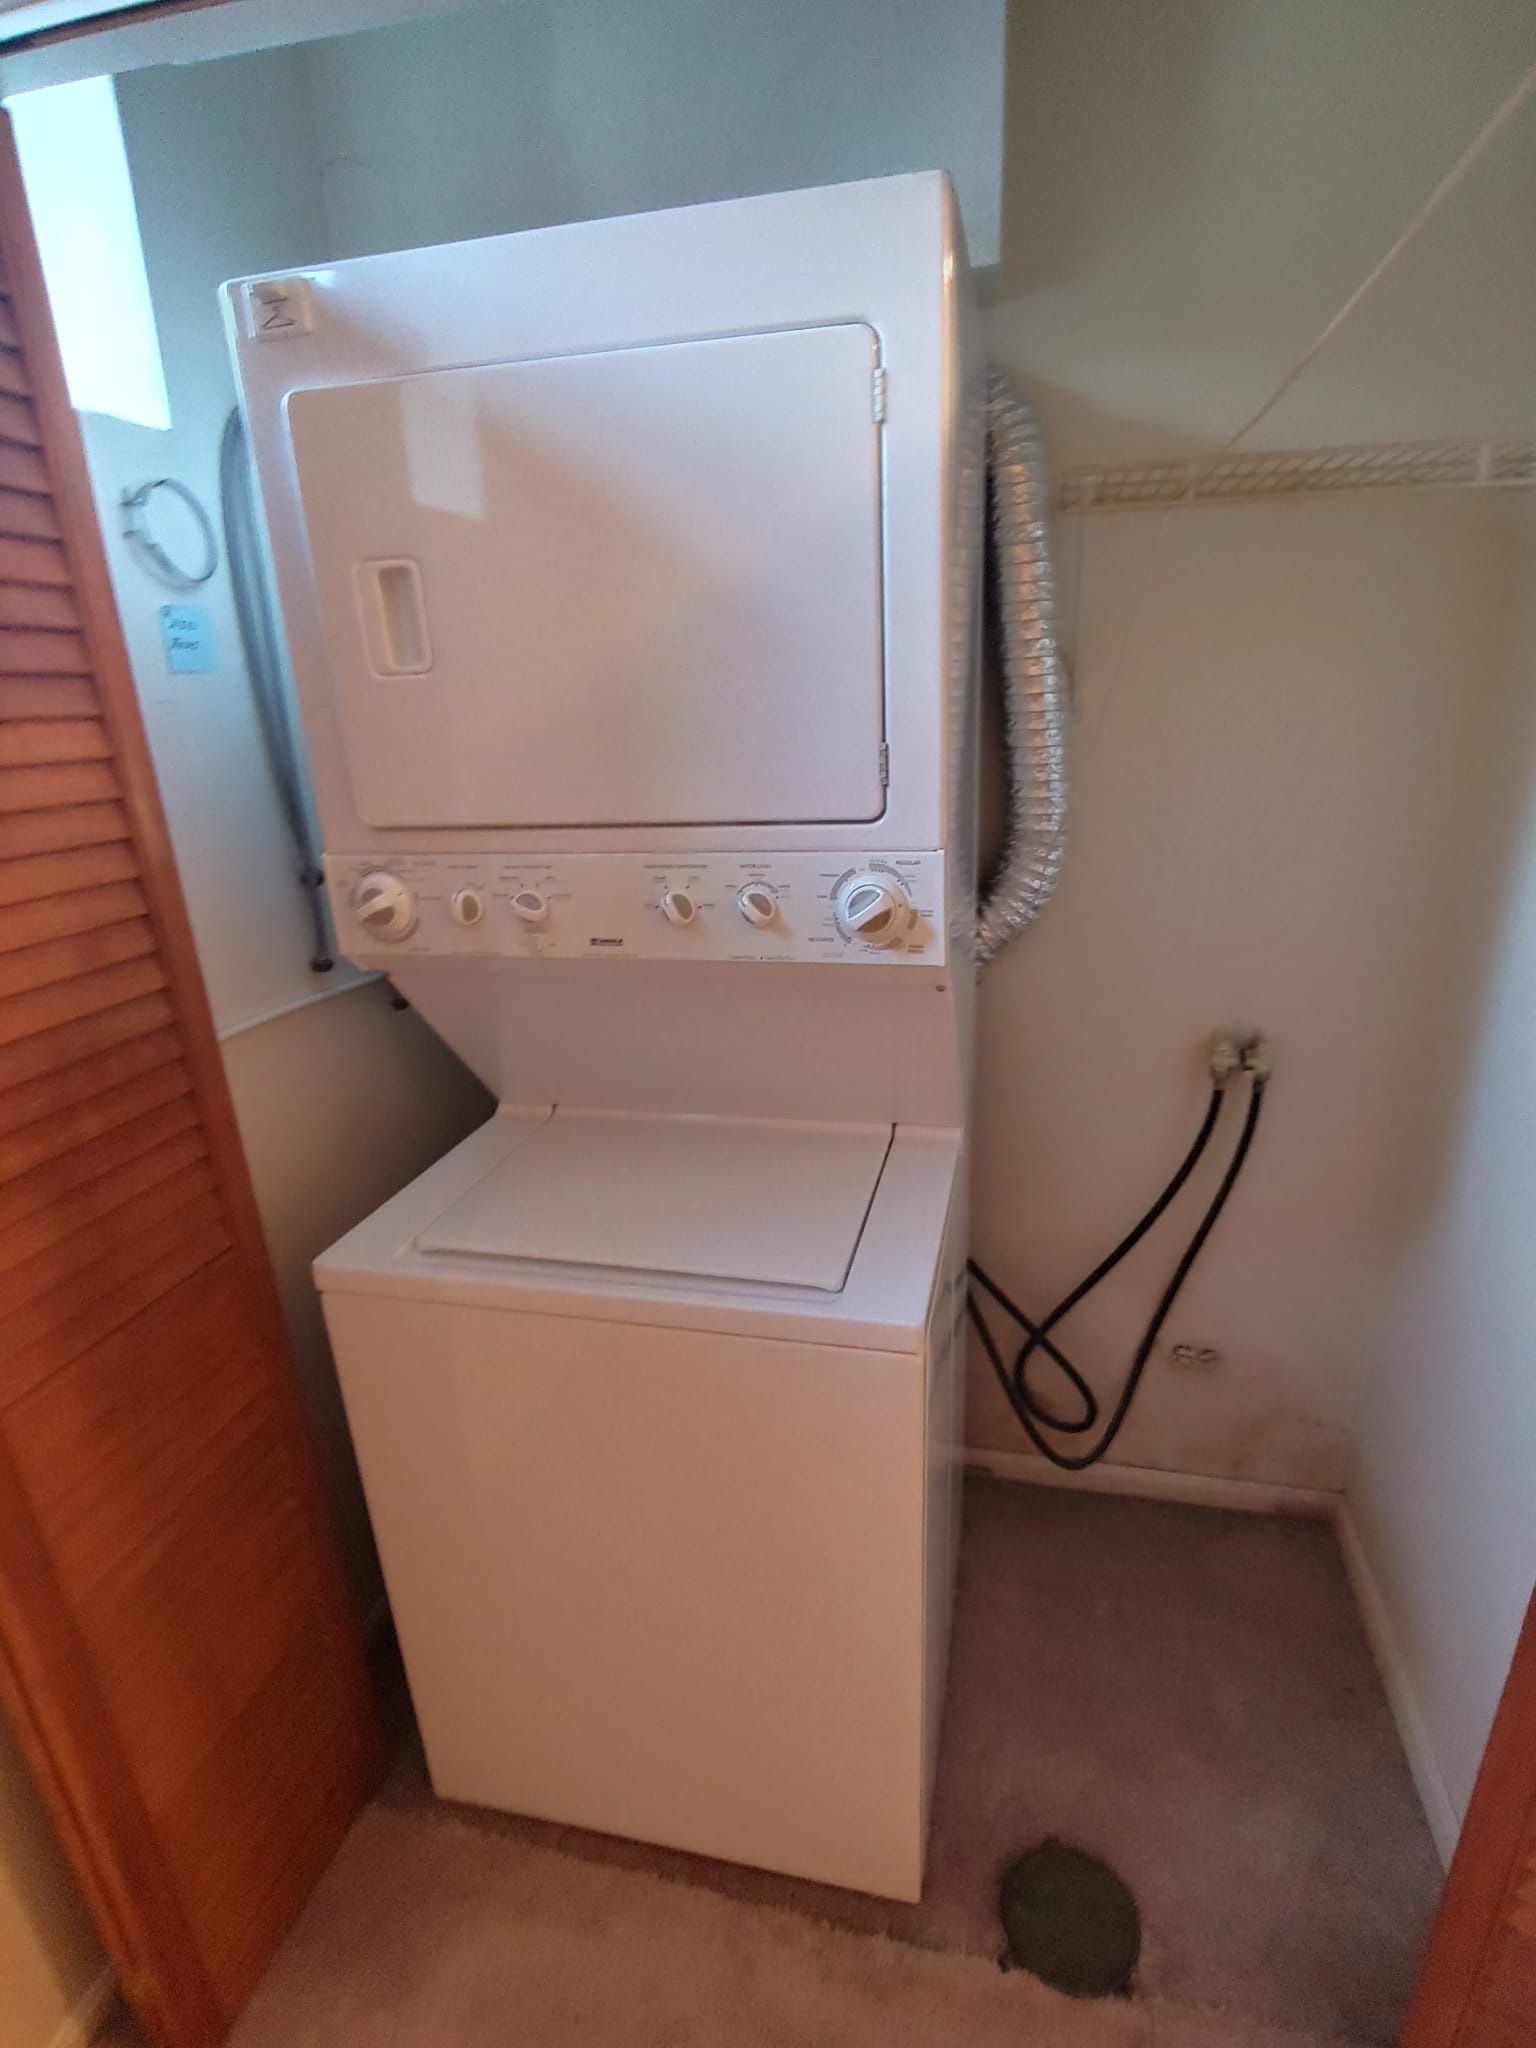 New Washer And Dryer 